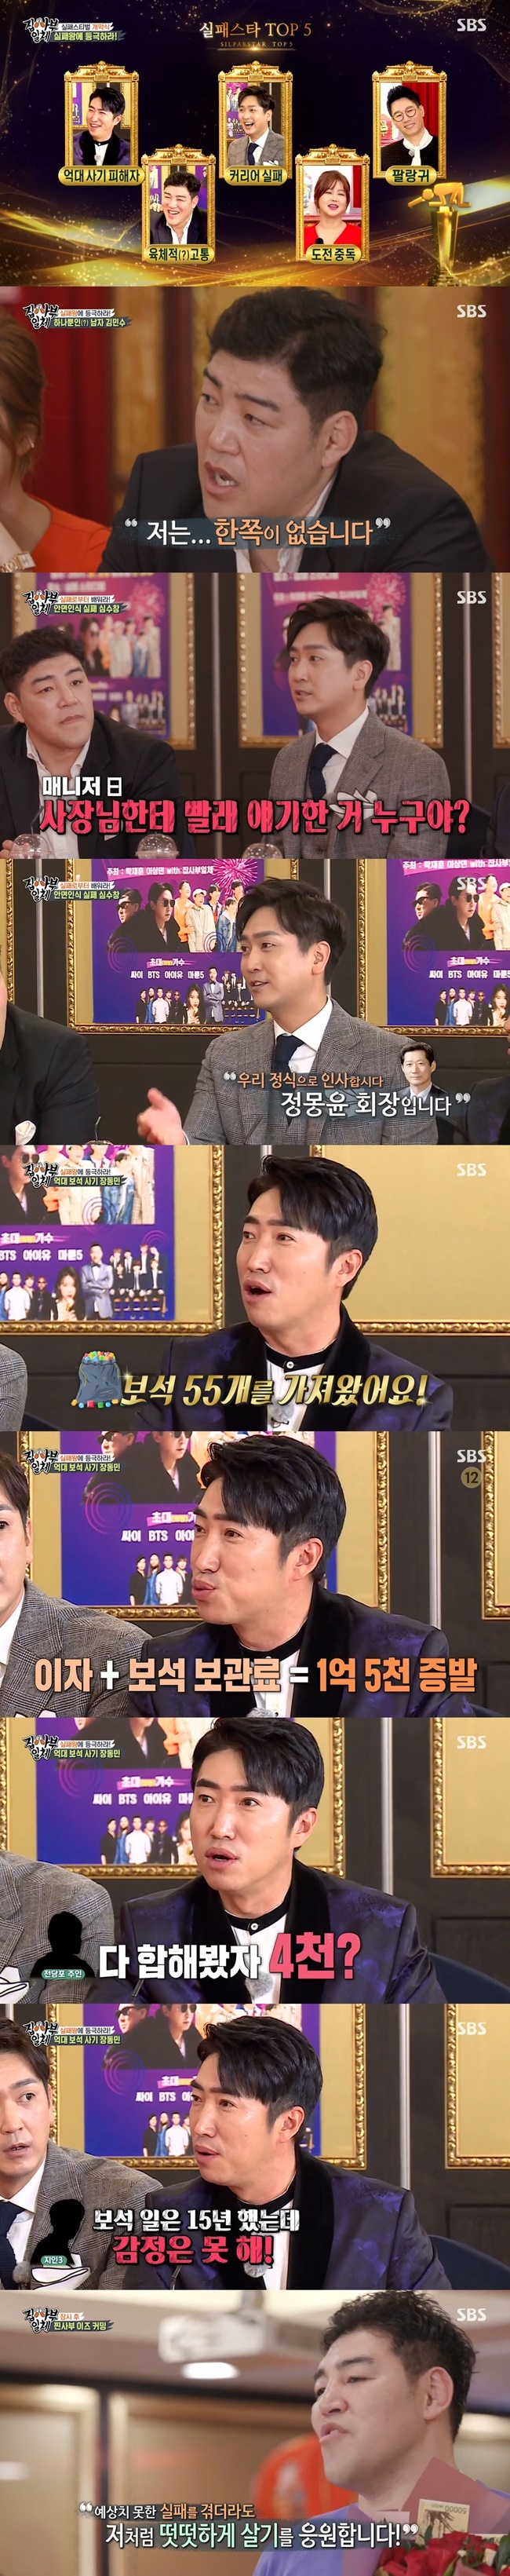 Jang Dong-min revealed the full story of the Jewelry Records of the Grand Historian case that emerged earlier.On SBS All The Butlers, which aired on March 28, the failure festival, which celebrates failure, has completed its four-week long journey.On this day, the failed candidates told their failure cases.Kim Min-soo, a martial arts player, said, Kyonggi is going to the first, second, third and fourth rounds, but the plastic foul cup was broken in the second round.Kyonggi was followed up and was hit once more in the fourth round, and after the medical judgment, Kyonggi was eventually won. After being transferred to the hospital shortly after Kyonggi, he was taken to the hospital and took the blood on his legs.I do not have one testicle due to this injury. Shim Soo-chang then said, I said I would donate every time I won Kyonggi, but I lost a consecutive game. Eventually, my nickname became a 0-member donation angel.Also, Shim Soo-chang said, I do not memorize my face well.When I was in Nexen, I did not wash my uniform well, so I complained to some The Man from Nowhere that laundry is not good.Later, I gathered at the gathering time before the practice and the manager said, Who told the boss about the laundry here?Also, Shim Soo-chang said, In the past, some The Man from Nowhere came in and sat in the dugout.I went next to him and said, The Man from Nowhere, you cant come in here. And he said, Ive been here a lot.Later, I was Hyundai Haika Chung Mong-yoon, chairman of Hyundai Haika. In addition, the entire Jewelry Records of the Grand Historian case of Genius Jang Dong-min, who had shocked the public earlier, was also reported.Jang Dong-min said, Acquaintance, who lived very well, has left Jewelry, such as rings and necklaces, to Apgujeong The Pawnbroker due to business failure.After the date, the disposal right was passed, so he asked me to borrow money. The amount was 300 million. I took two acquaintance and Jewelryappraisers to The Pawnbroker, and I showed them the archives and brought exactly 55 Jewelry.There was a 60-carat ruby, but it was 1 billion per one. The problem was that 300 million asked by acquaintance was not for me.So I asked Friend and Acquaintance with money to explain the situation and borrow money.And then Friend said, I dont know Jewelry and the people can lend you.I borrowed money at first, but when I think about it, I set up all the appraisers, friends, and acquaintance.I could not think of it as Records of the Grand Historian. Eventually Jang Dong-min borrowed 300 million in his name from Friend for acquaintance, and Jewelry, who came from The Pawnbroker, kept it in World Bank.At that time, the World Bank deposit amounted to several million won a month, and Friends interest was about 20 million won.Jang Dong-min kept the World Bank safe key with Jewelry to prevent Records of the Grand Historian.However, the acquaintance handed over all the loan interest and World Bank deposits to Jang Dong-min because of the lack of money, and Jang Dong-min paid 150 million won for six months and comforted him to think that he would pour 2,000 savings.Nevertheless, when acquaintance did not seem willing to reimburse the money, Jang Dong-min came to Jewelry and went back to Jongno for emotion.As a result of the appraisal, Jewelry, which was estimated to be 1 billion, was about 20 million won, and the total amount of all Jewelry was about 40 million won.The shocked Jang Dong-min protested to Jewelryappraiser, who had a billion feelings, but he refuted, I have been doing Jewelry for 15 years, but I can not feel it.Eventually, Jang Dong-min became a victim of the Grand Historian case of the billion Jewelry Records of the Grand Historian.